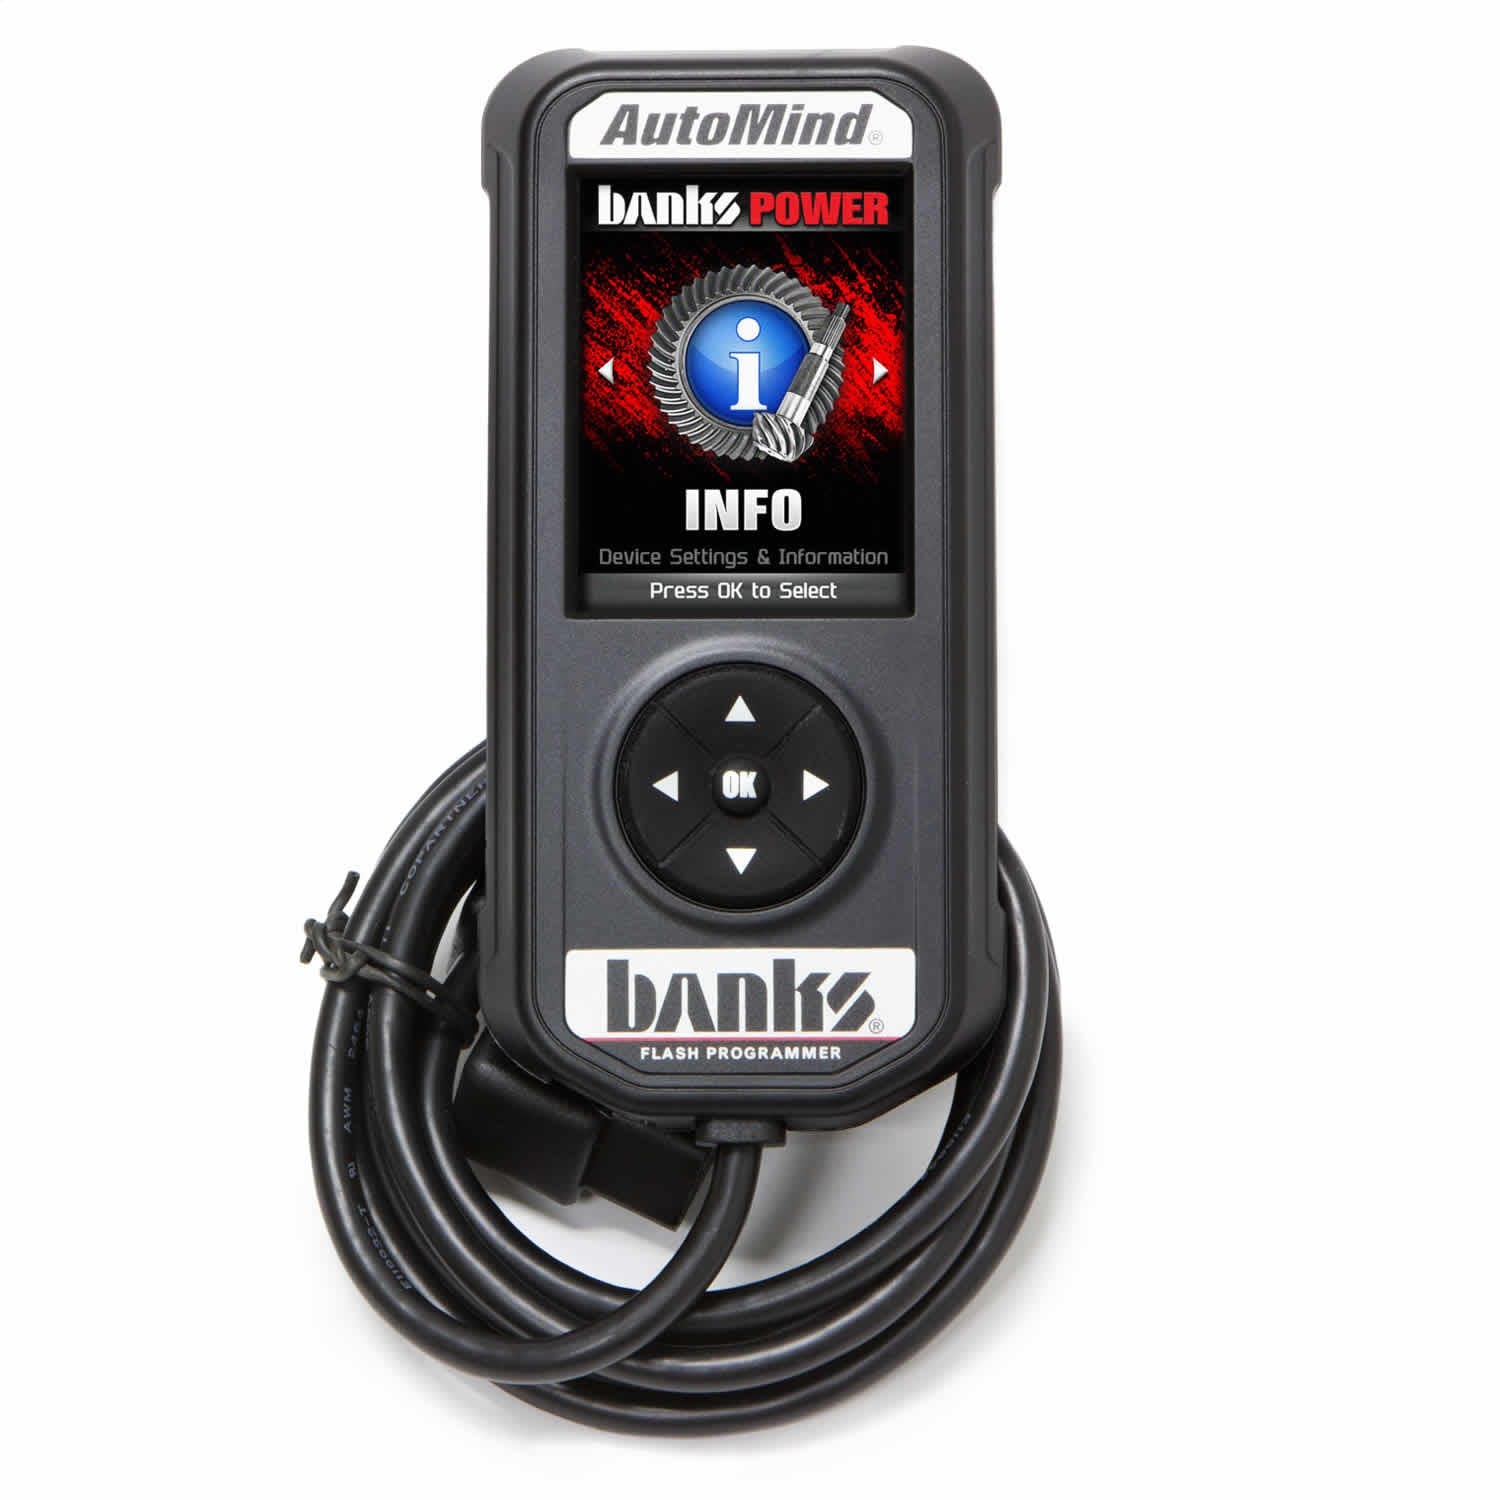 Banks Power 66411 AutoMind® 2 Programmer